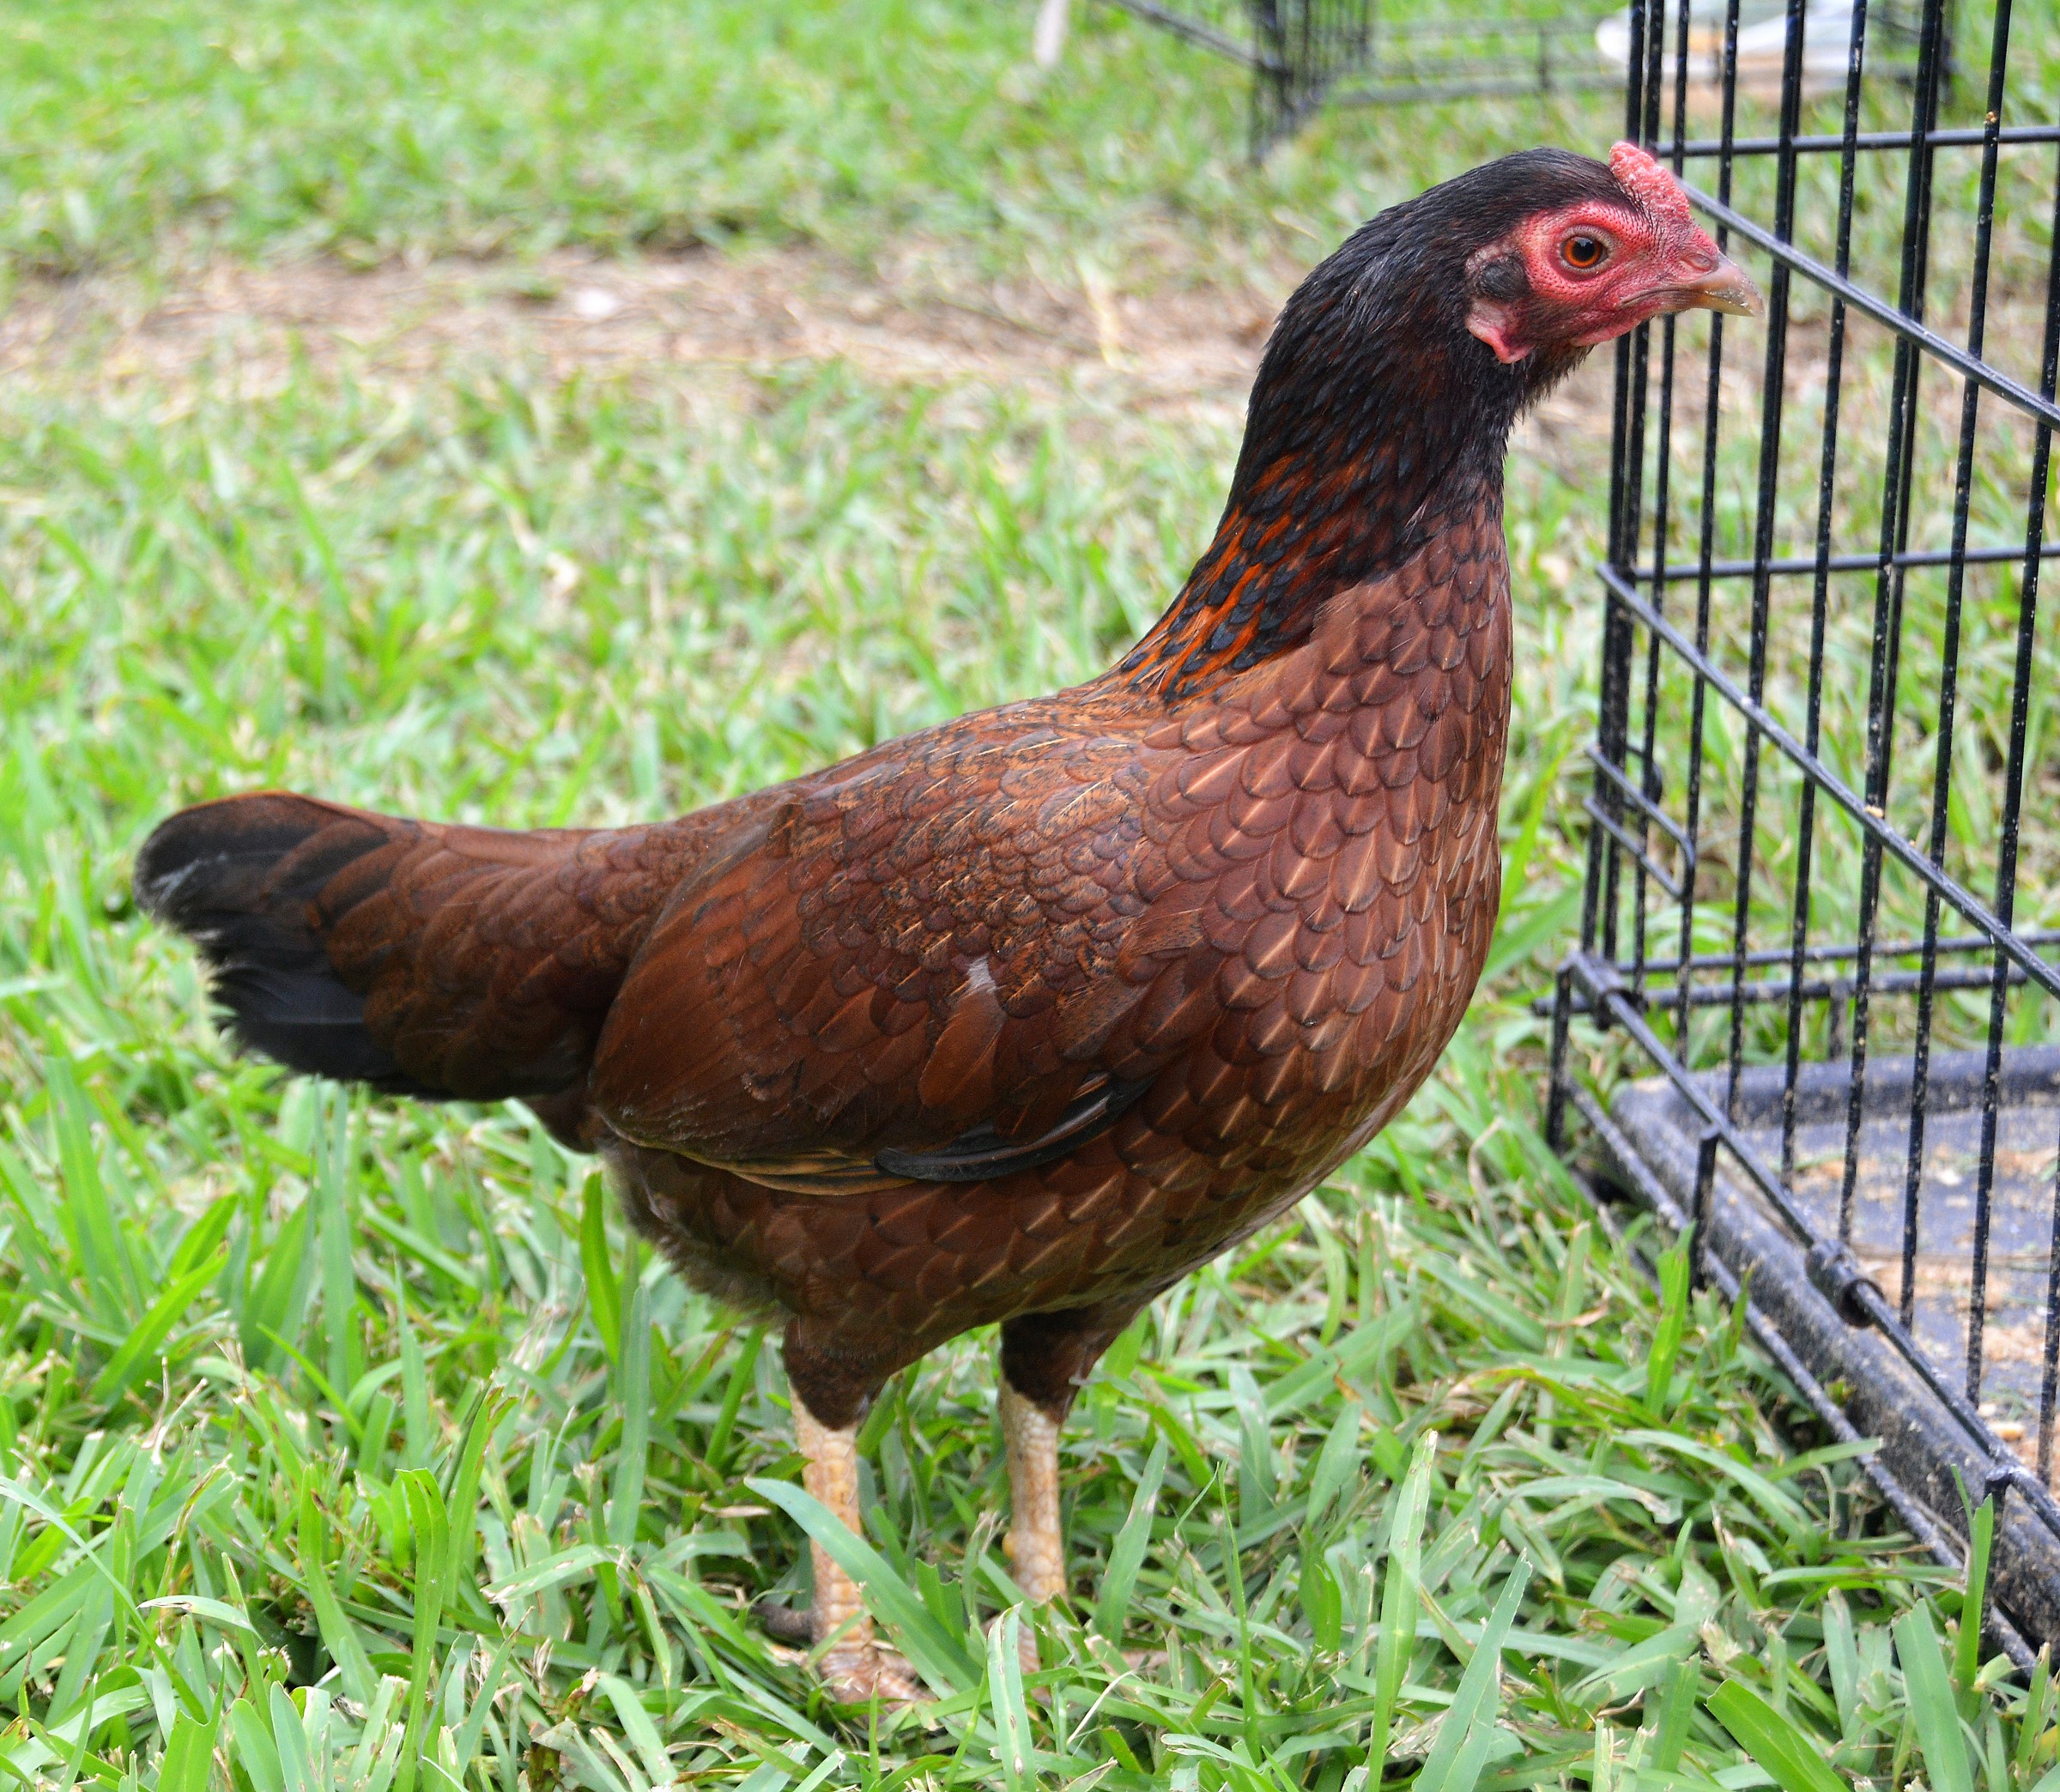 black and red chicken breeds